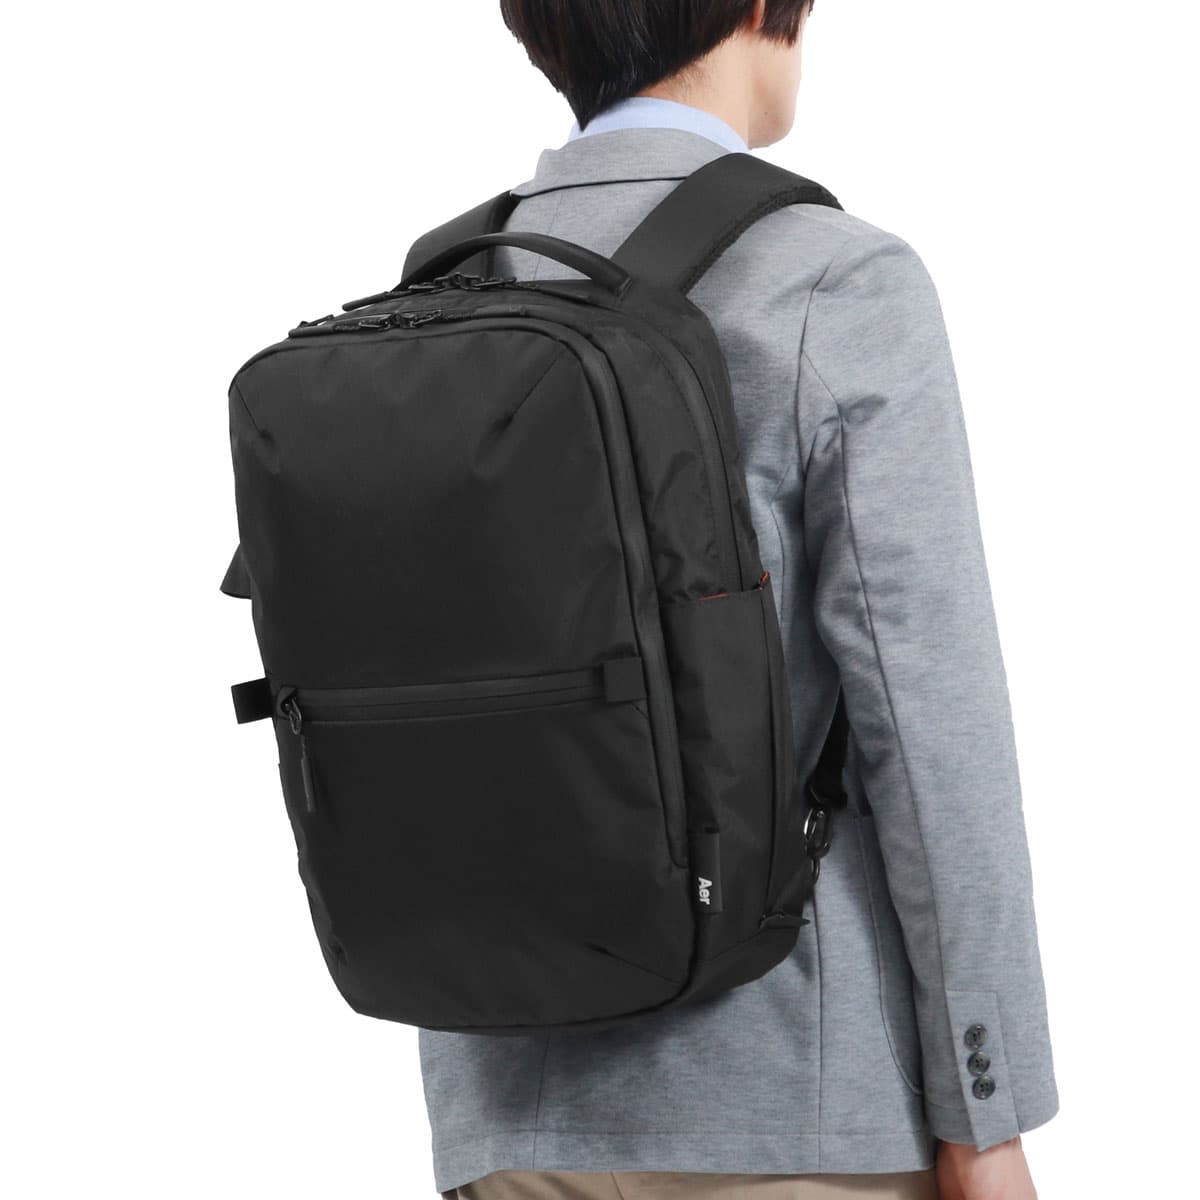 Aer エアー Travel Collection Flight Pack 3X-Pac 3wayバックパック 20L